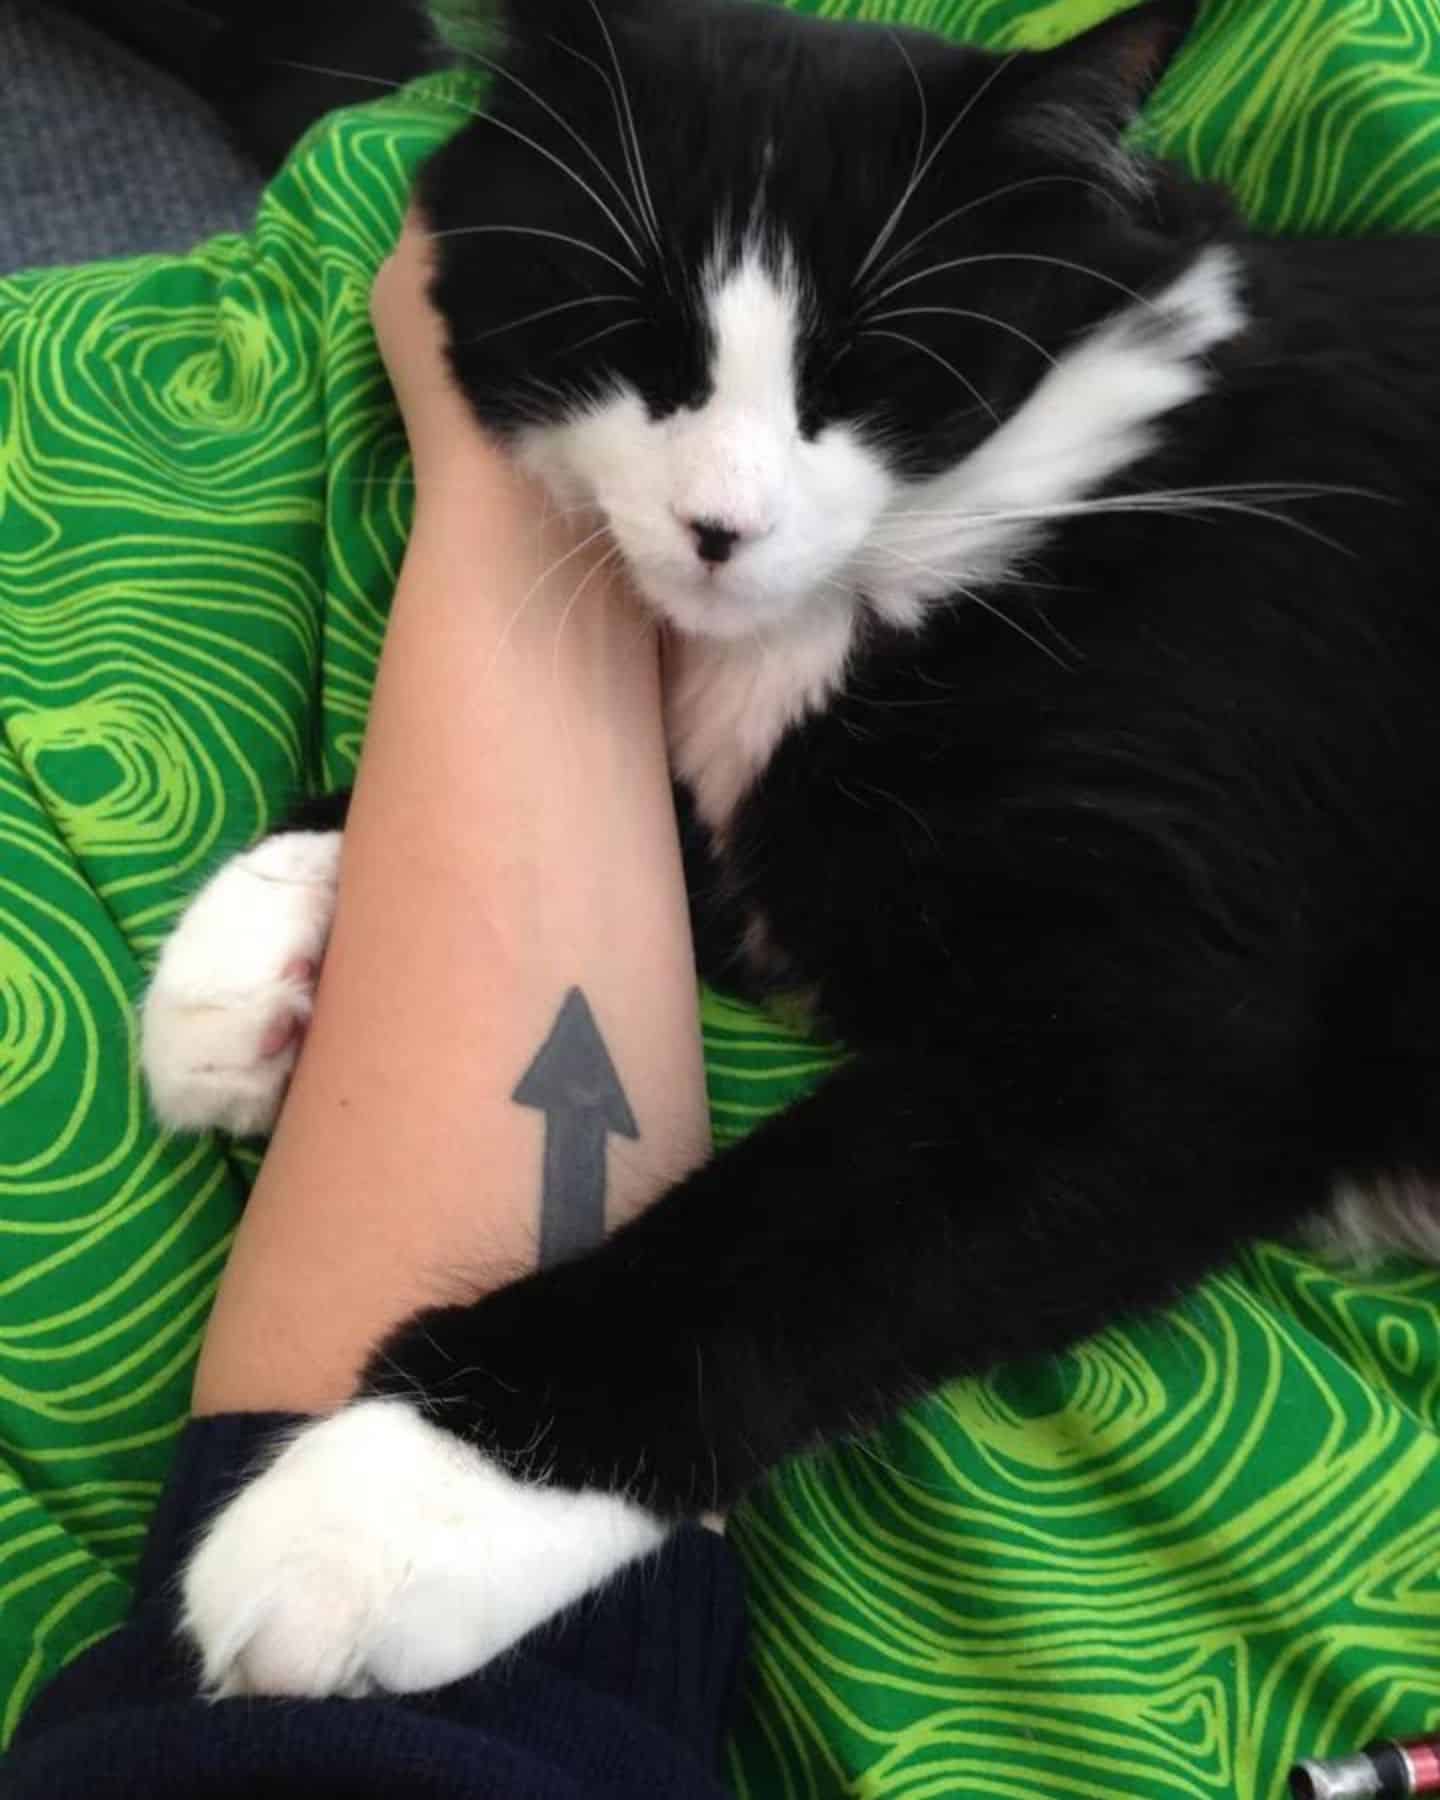 human with tattoo and black and white cat